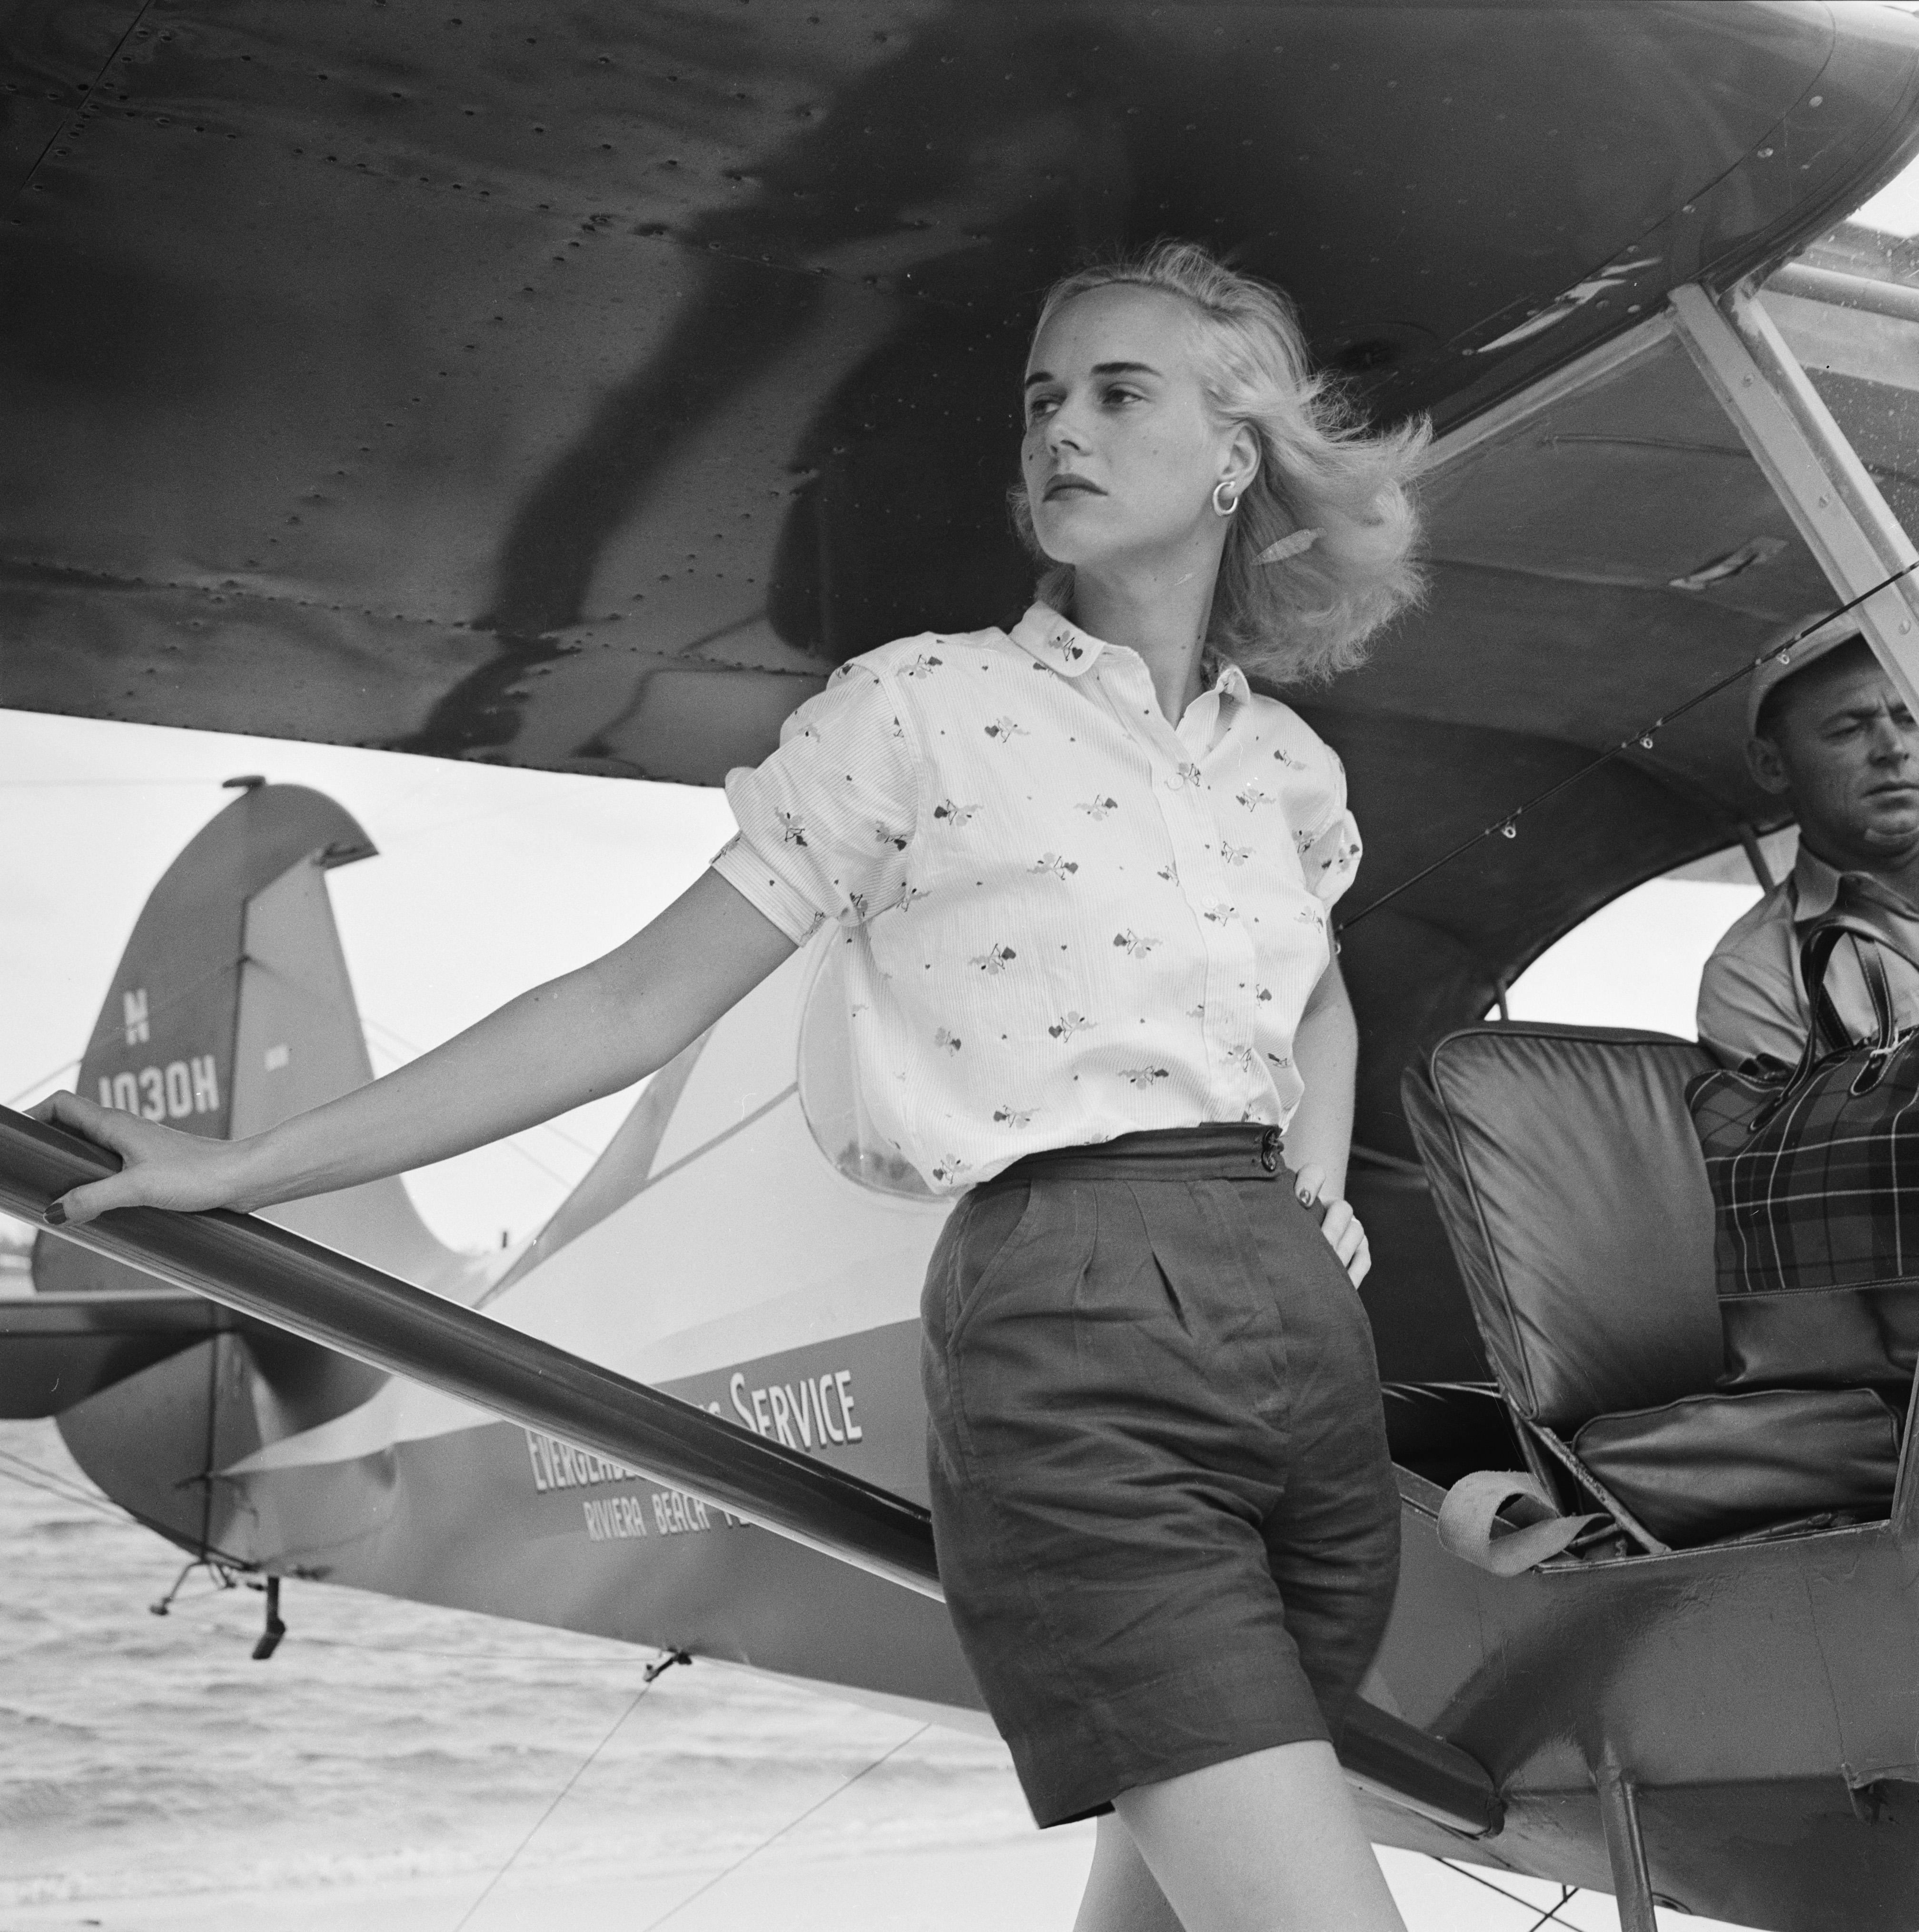 'Seaplane At Palm Beach' 1955 Slim Aarons Limited Estate Edition

Patsy Pulitzer (nee Patsy Bartlett) leaning against a seaplane belonging to the Everglades Flying Service, at Palm Beach, Florida, circa 1955.

Silver Gelatin Fibre Print
Produced